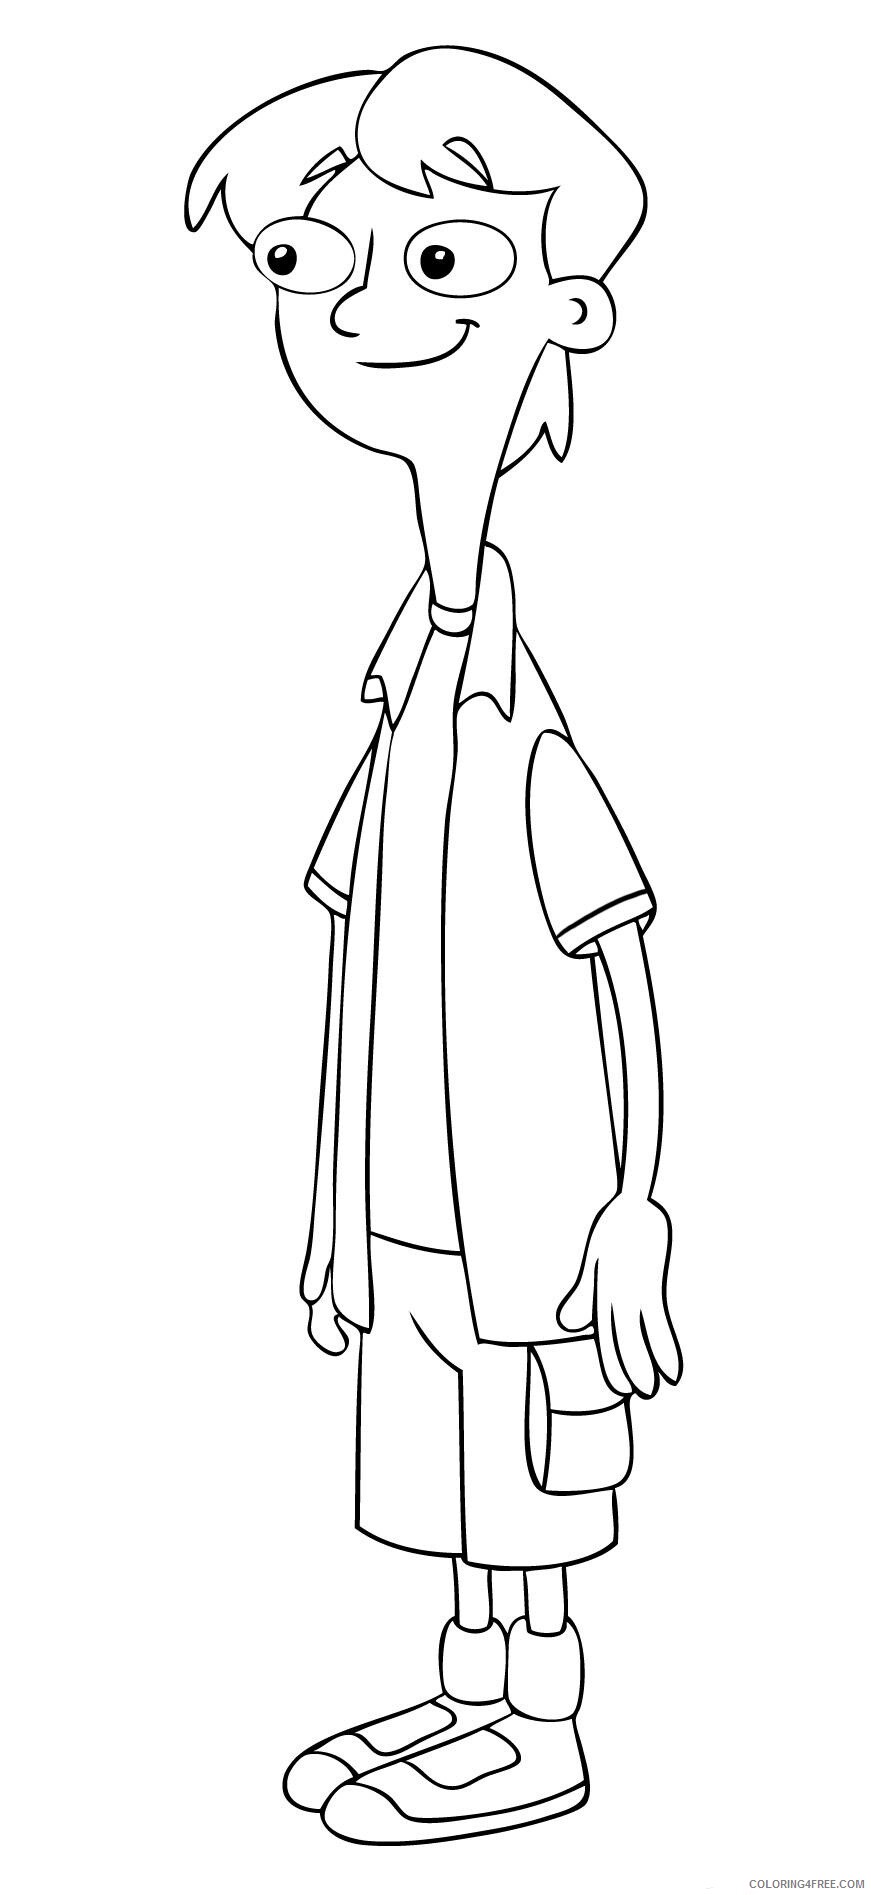 Phineas and Ferb Coloring Pages TV Film Printable 2020 06185 Coloring4free